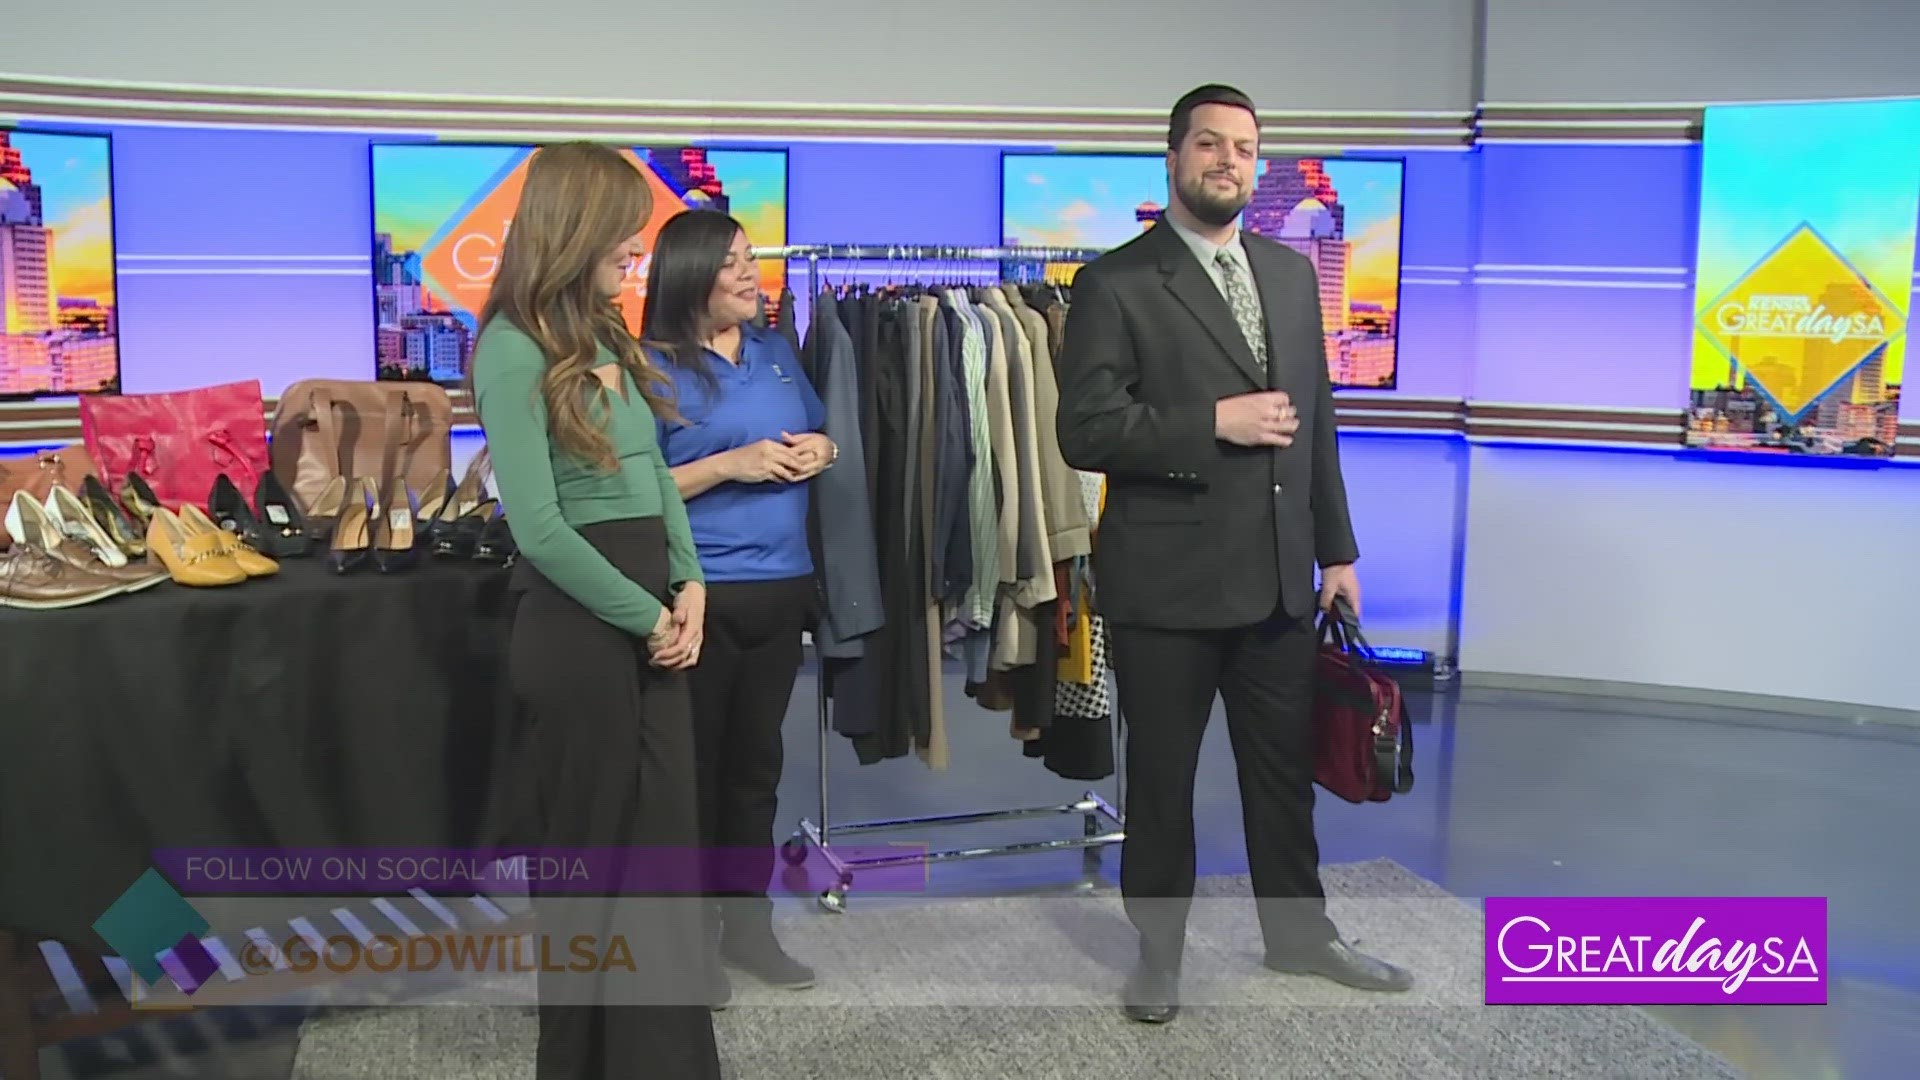 Libby Castillo with Goodwill San Antonio shares how you can get some great professional clothing that won't break the bank.